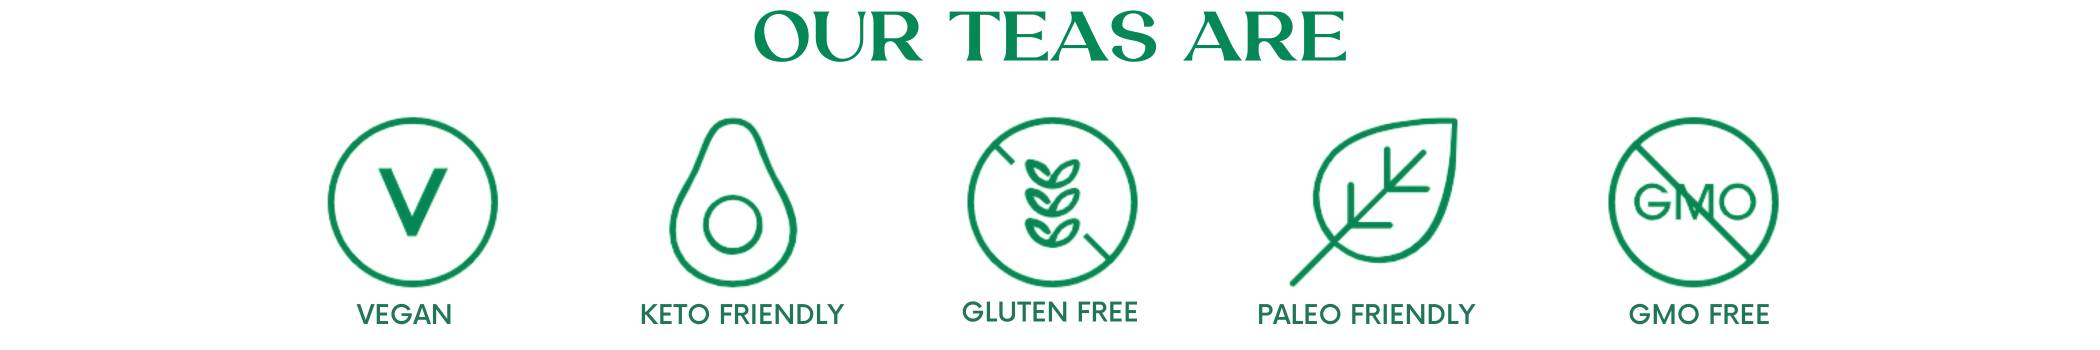 Quality about our green teas and herbal teas